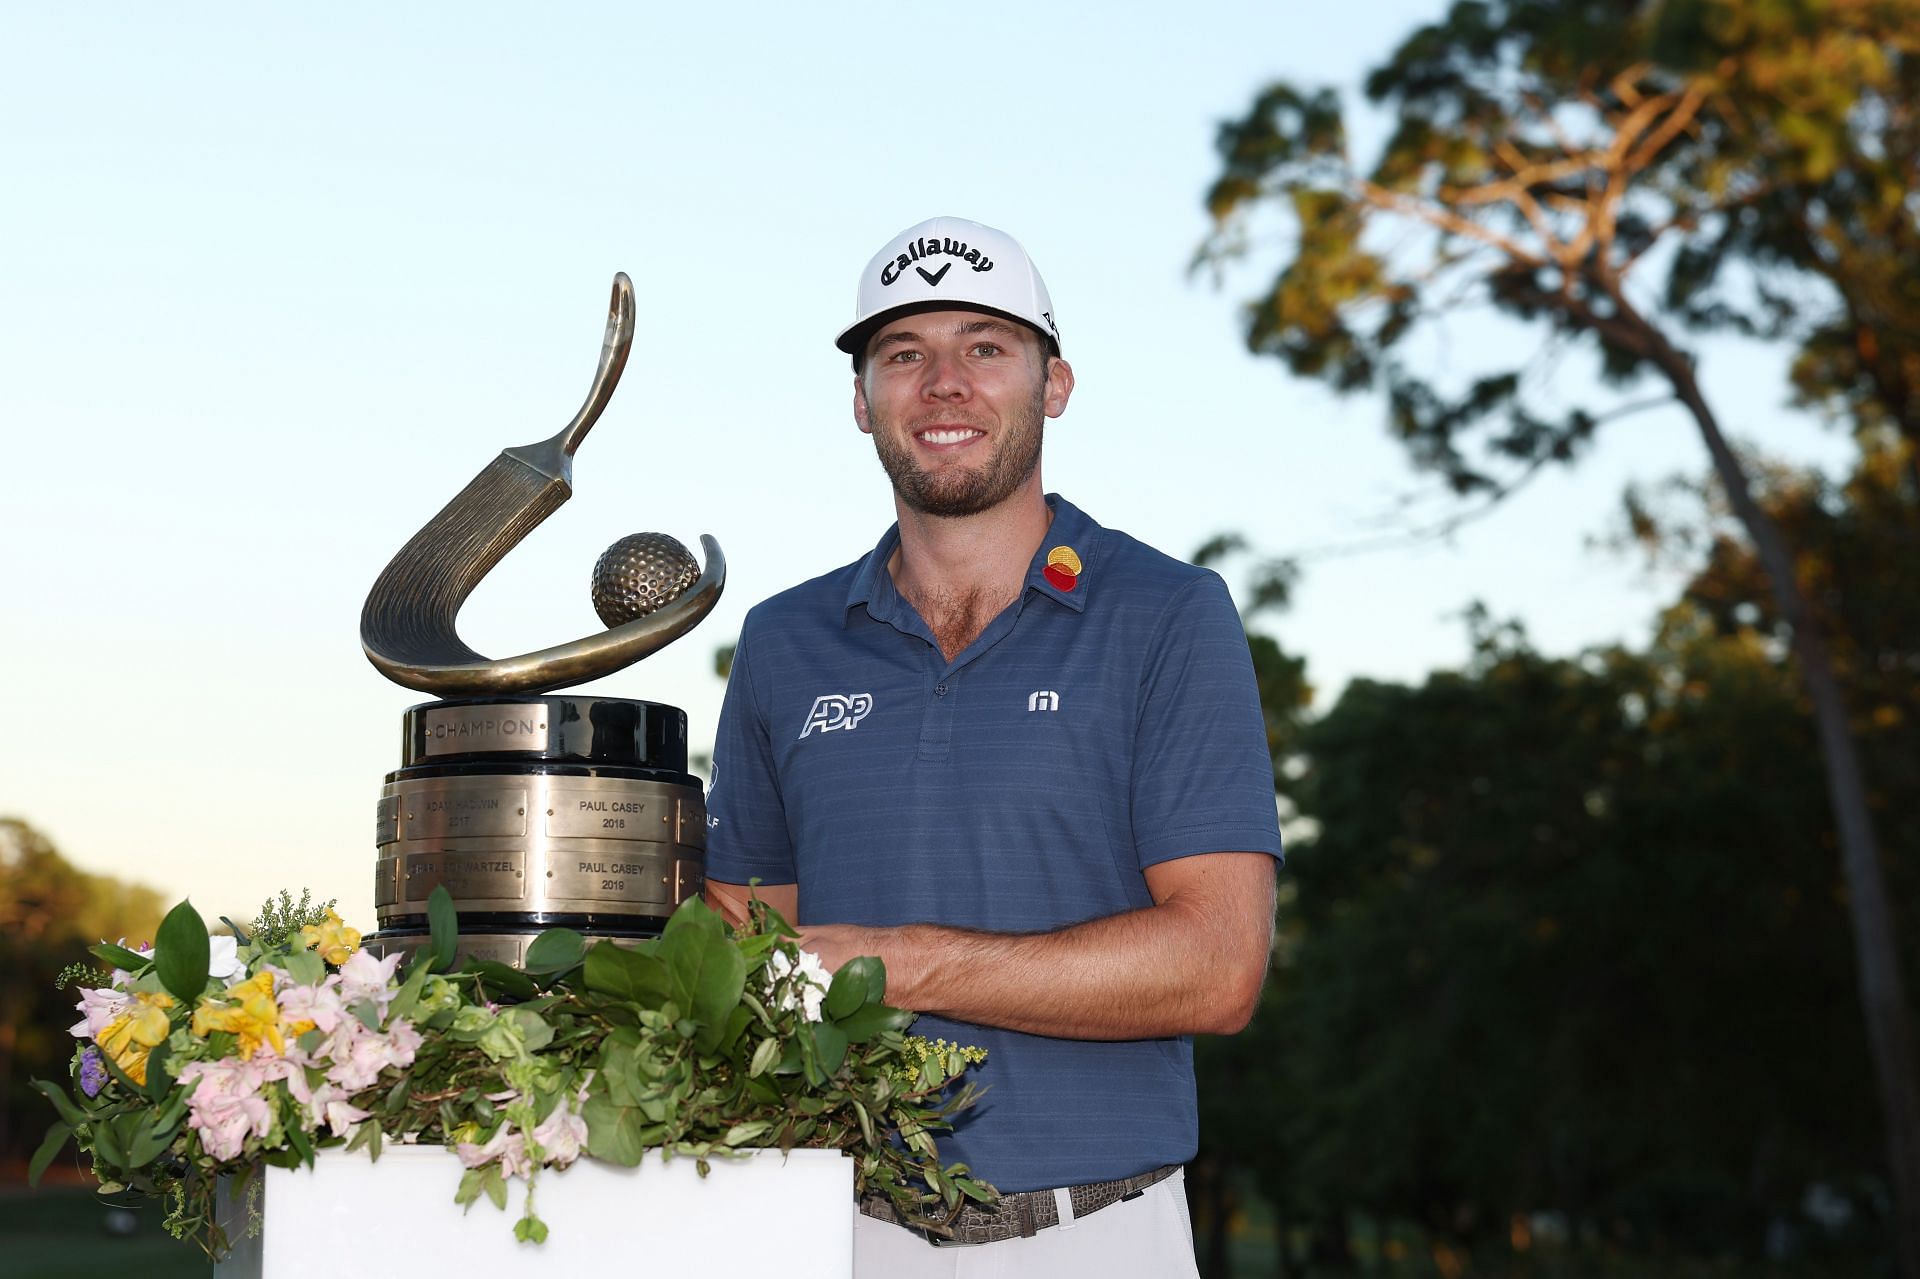 2023 Valspar Championship How to watch, TV schedule, online streaming, radio, and more